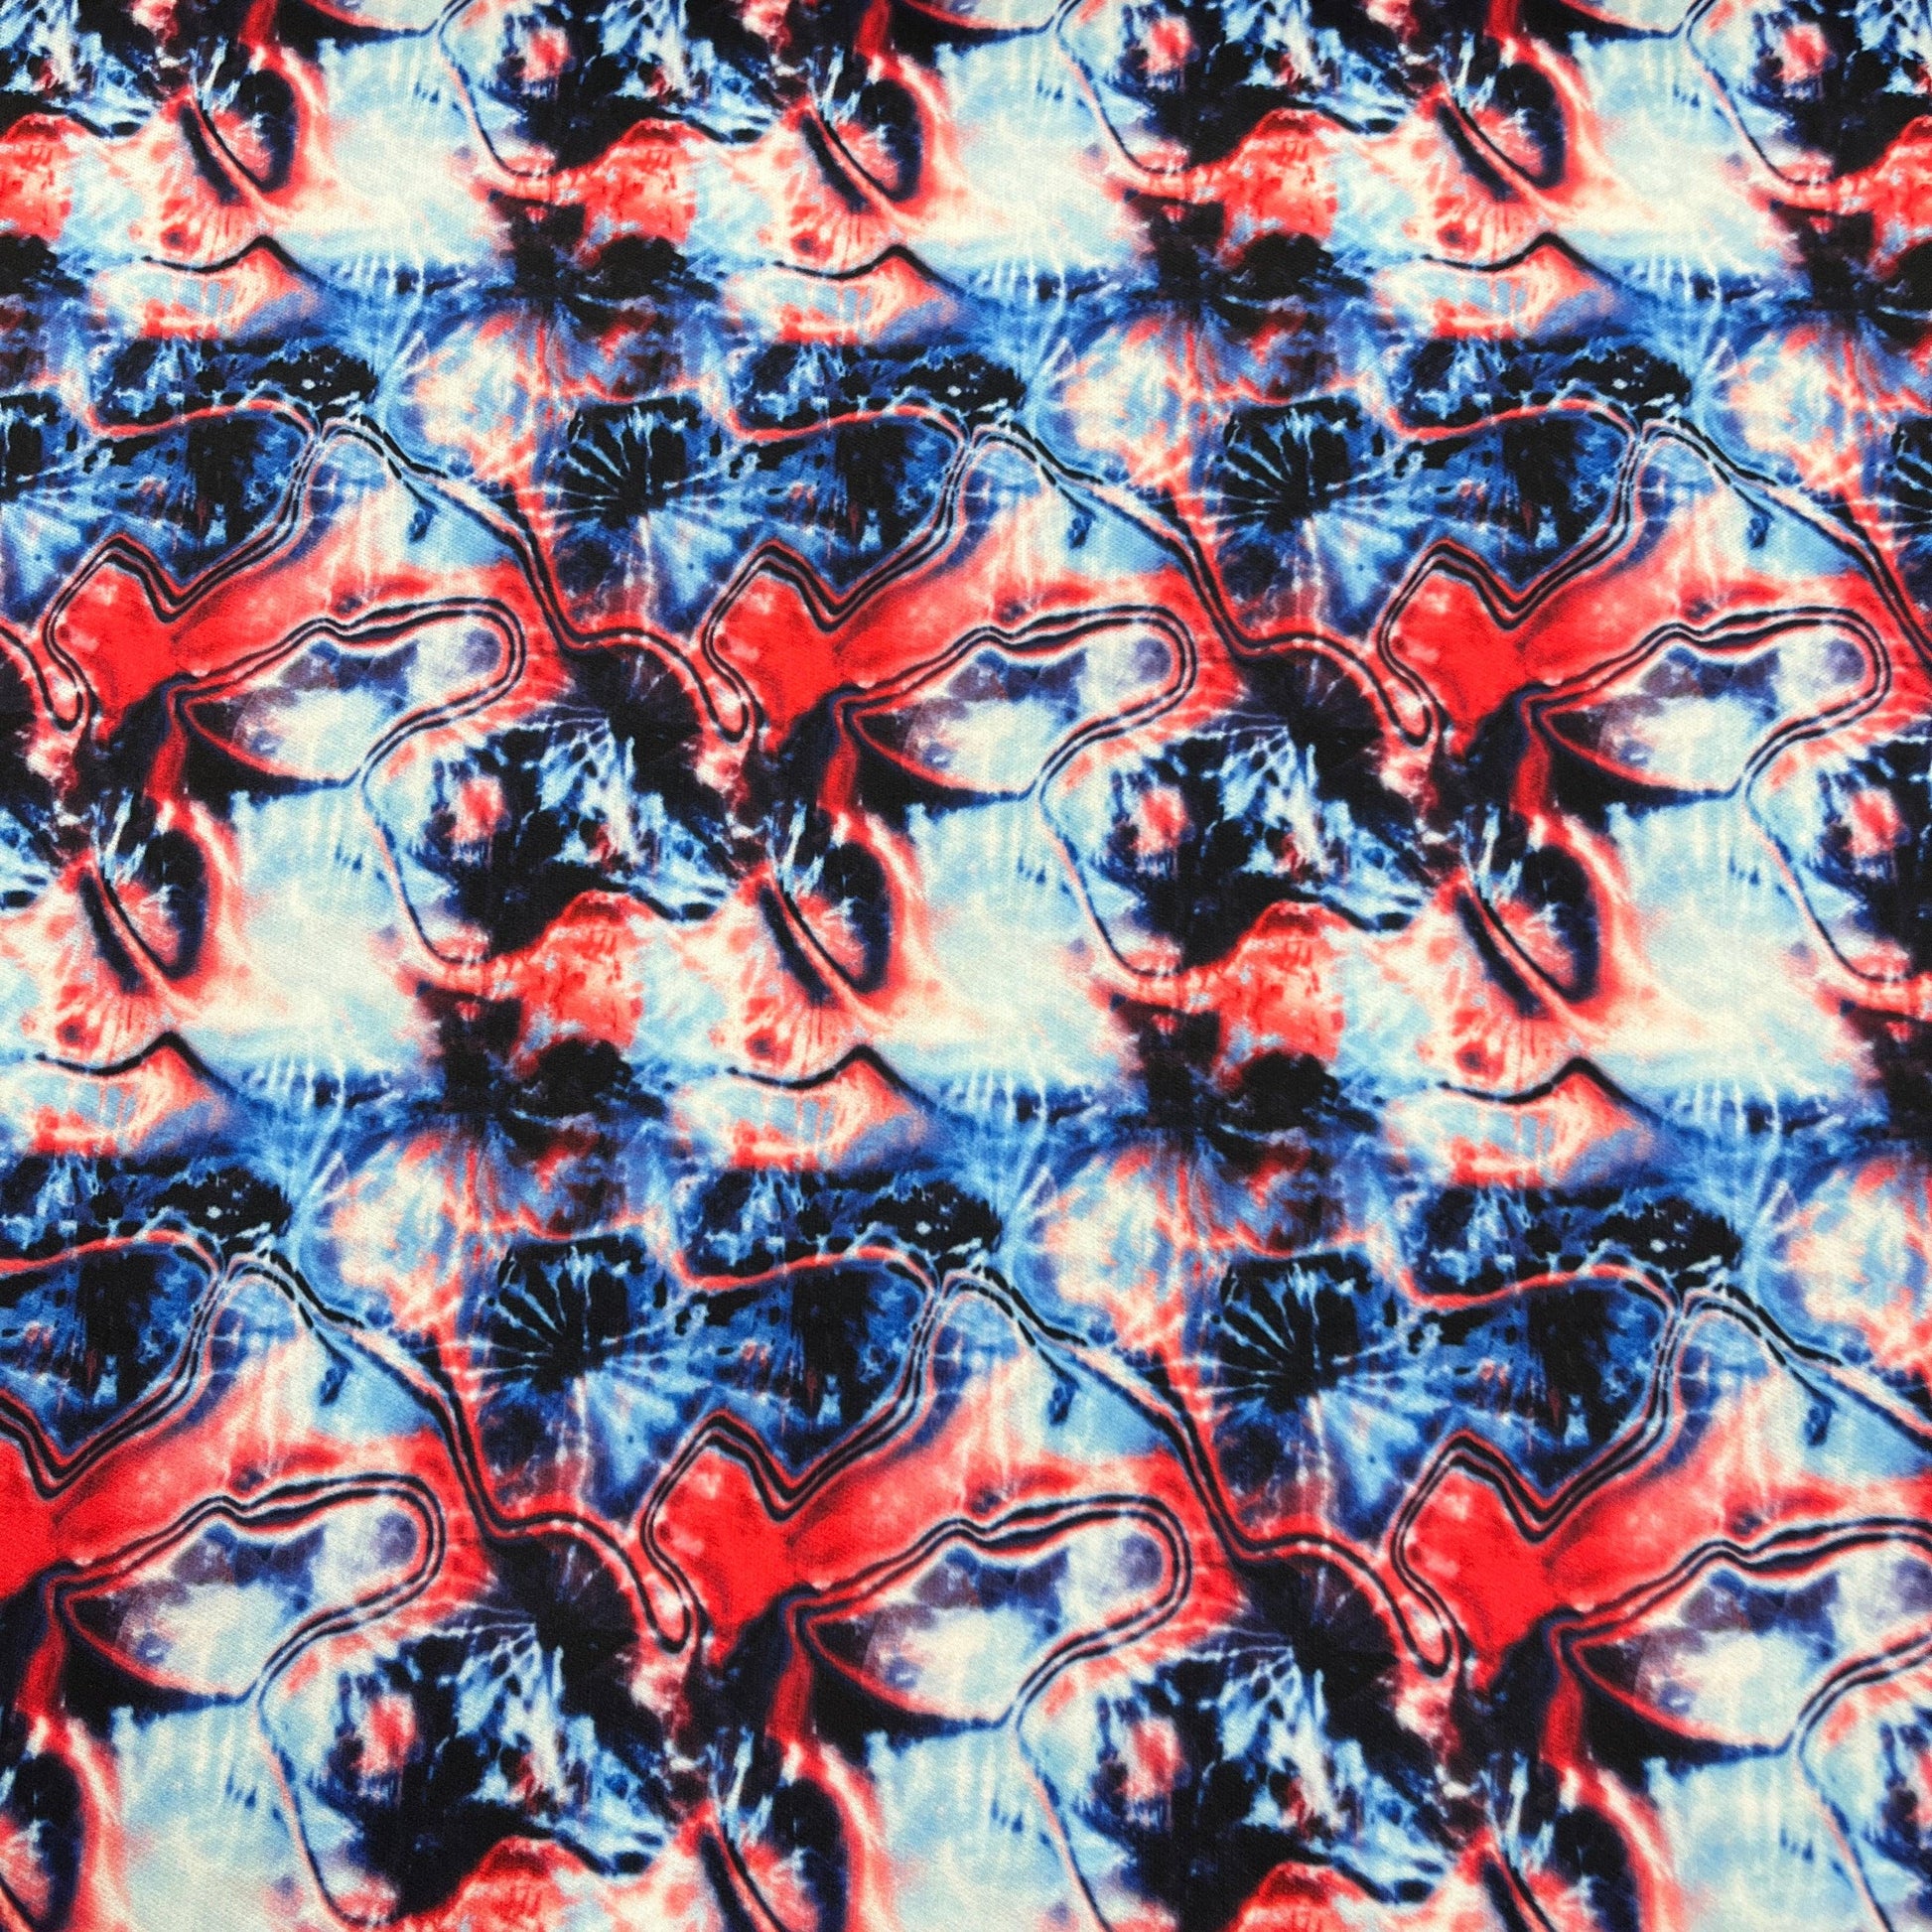 Red, White and Blue Tie-Dye 1 mil PUL Fabric - Made in the USA - Nature's Fabrics